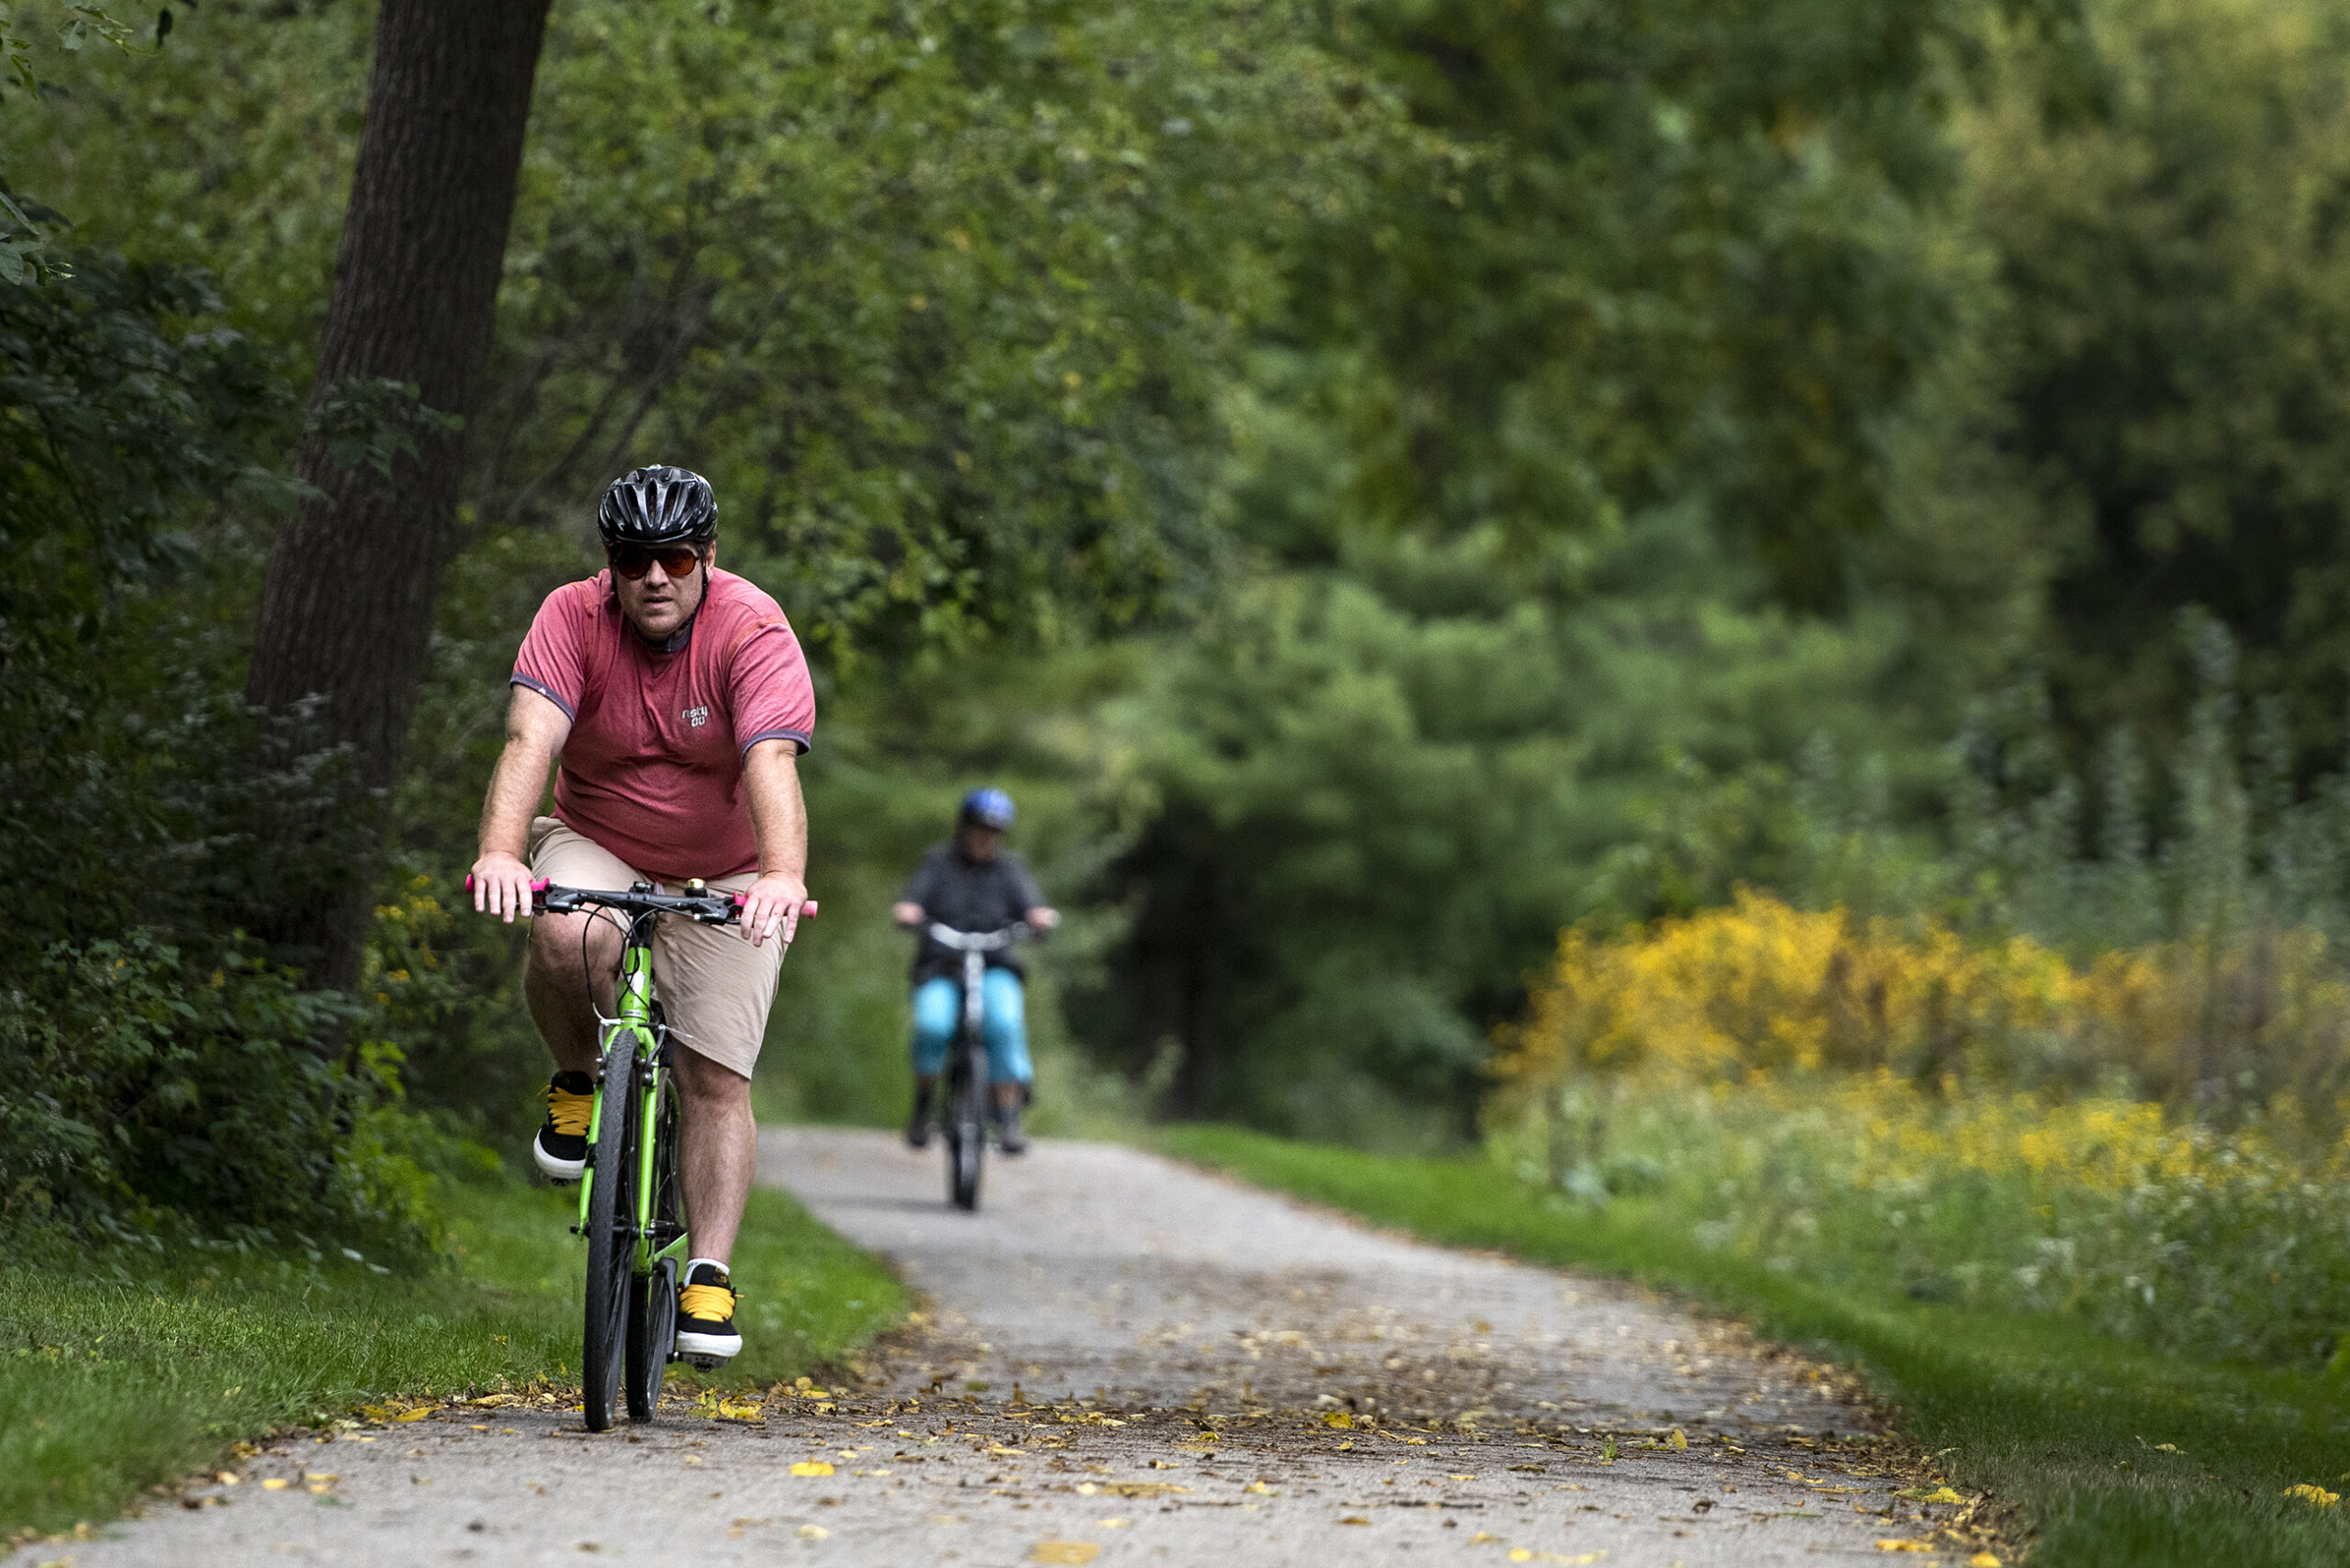 Two bicyclists ride on a paved section of the Ice Age Trail surrounded by greenery